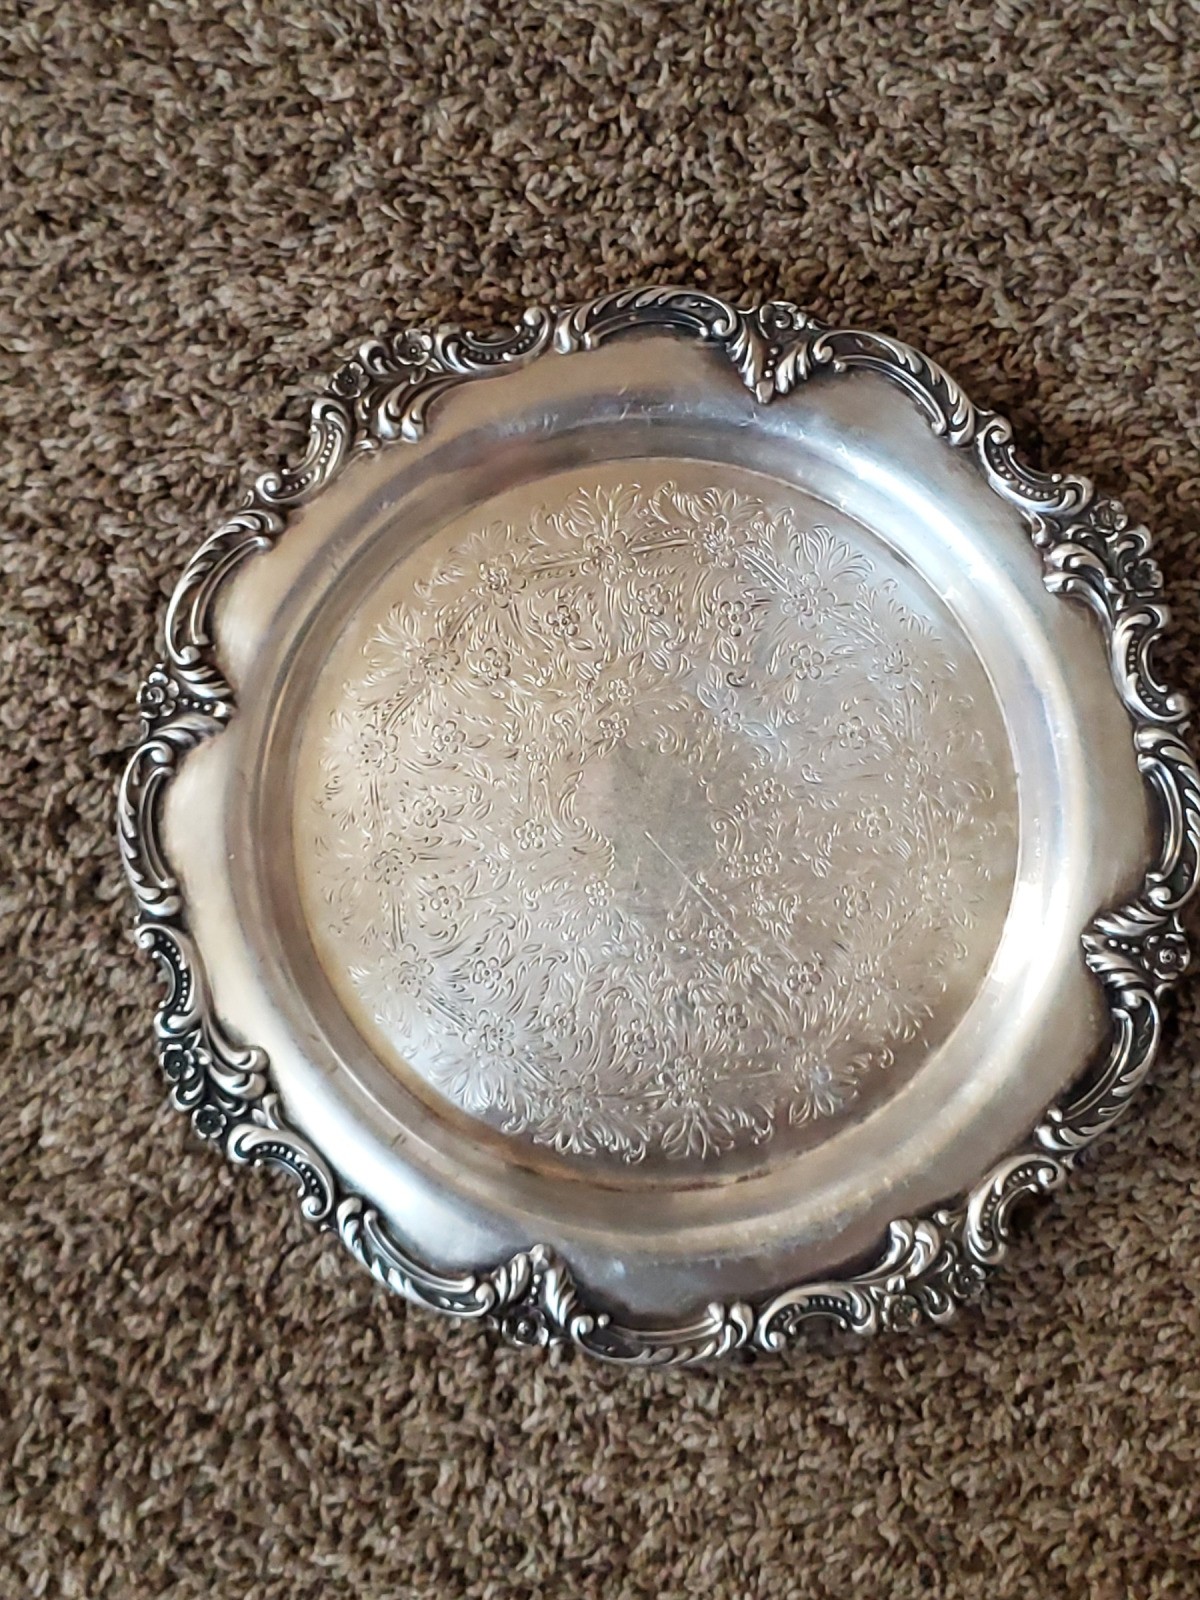 Silver plate your plate/tray with pure silver